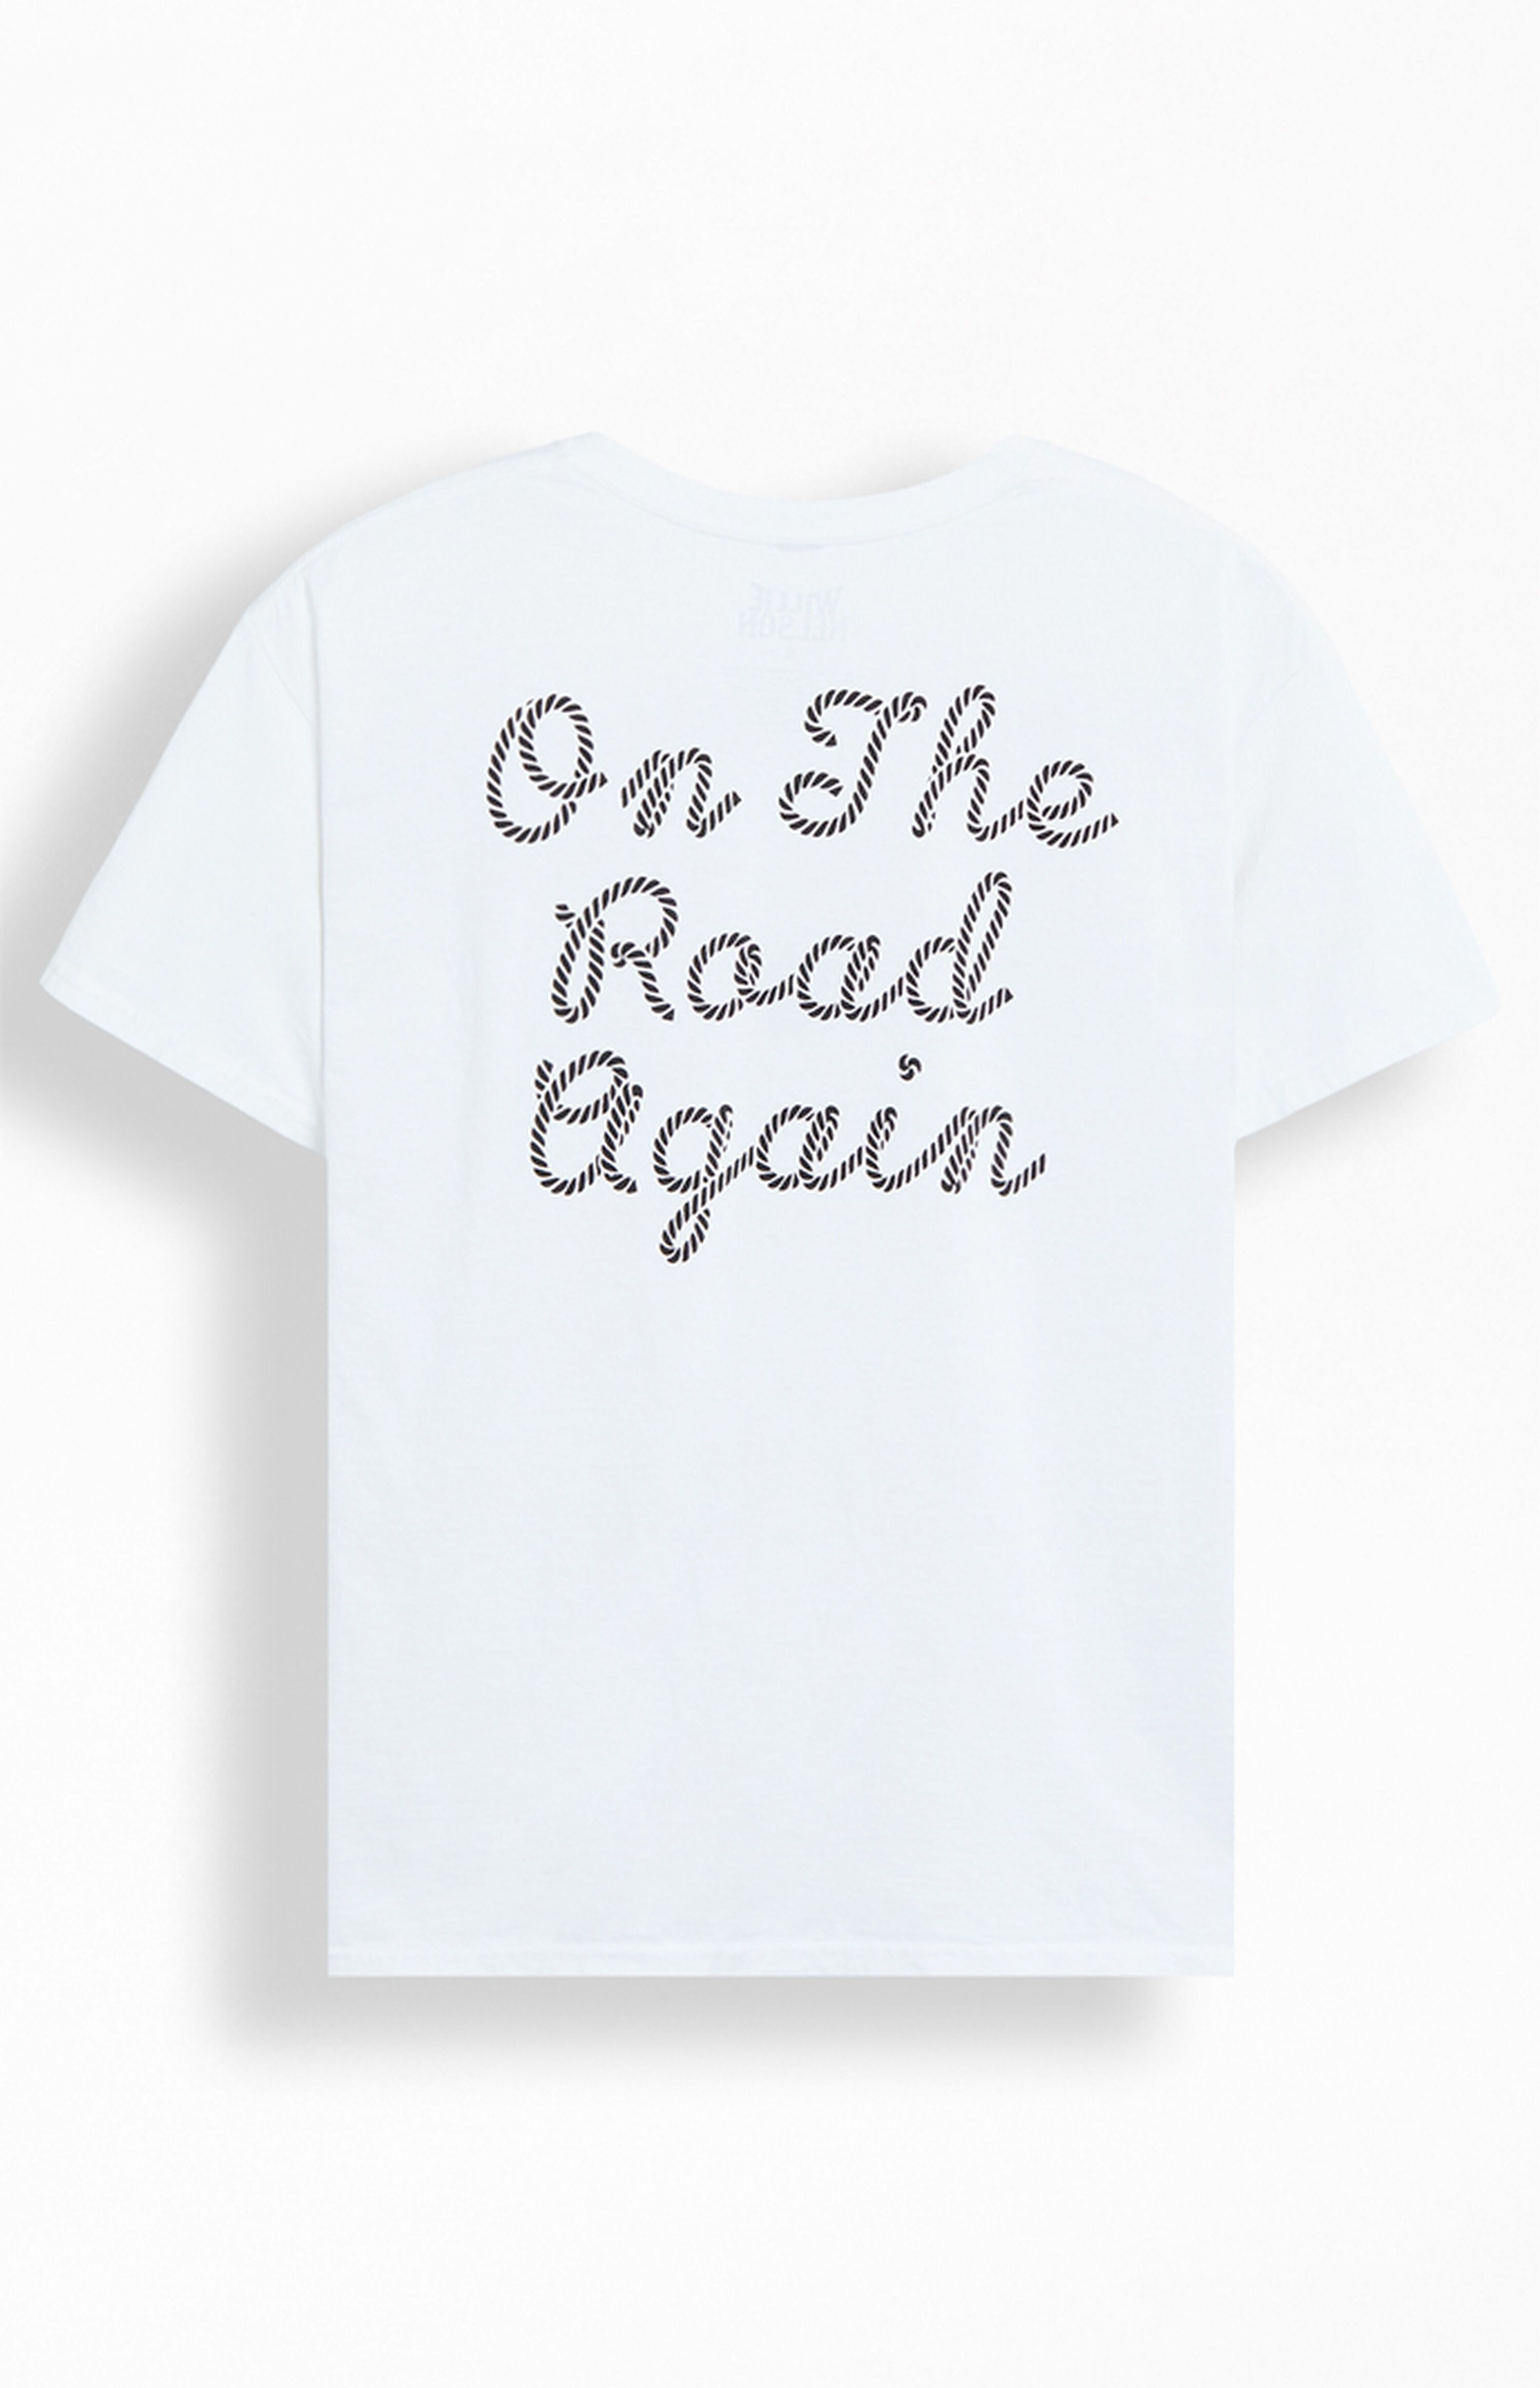 Willie Nelson On The Road Again T-Shirt | PacSun